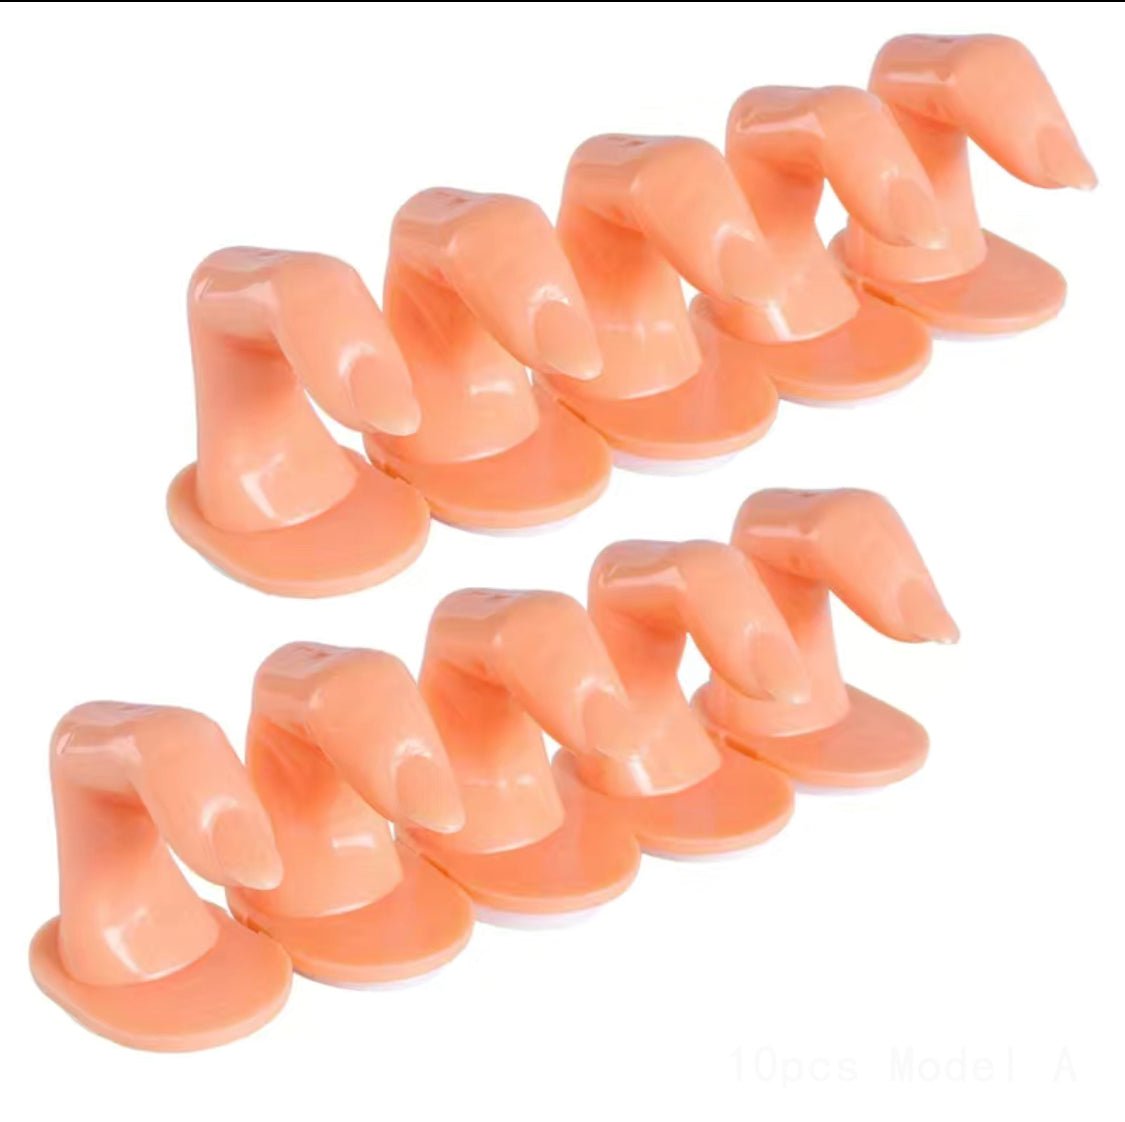 Practice Finger Reuseable Base For Nail Training (Set of 10) - Beauty Pro Supplies Canada